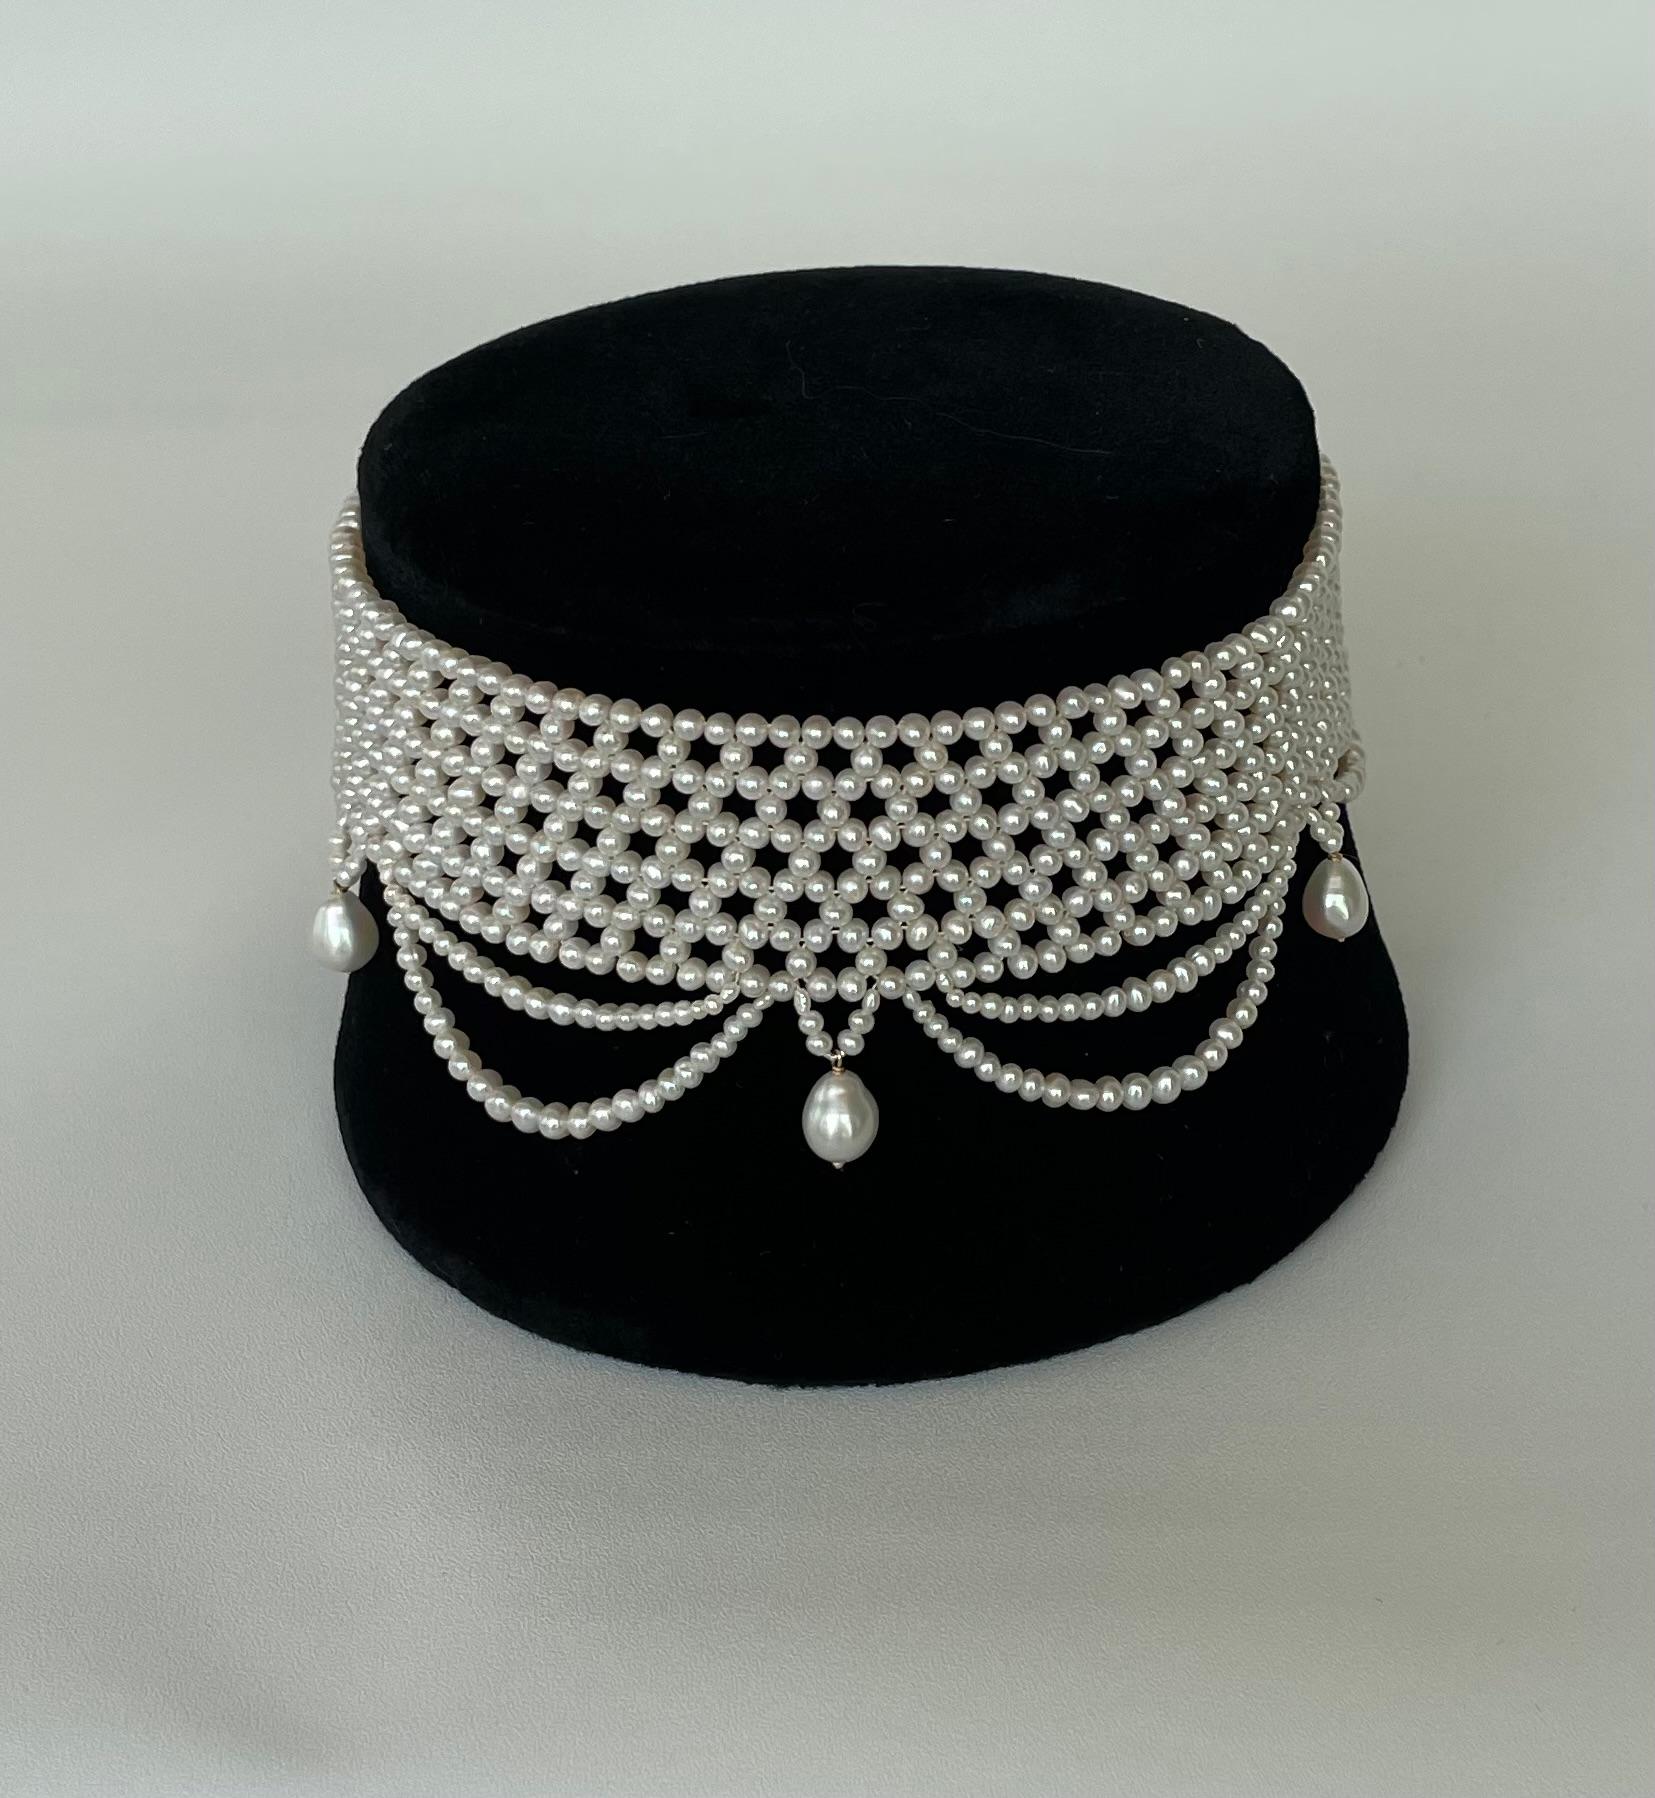 Marina J. Woven Pearl Draped Choker with Pearl Drops and Secure Sliding Clasp 4